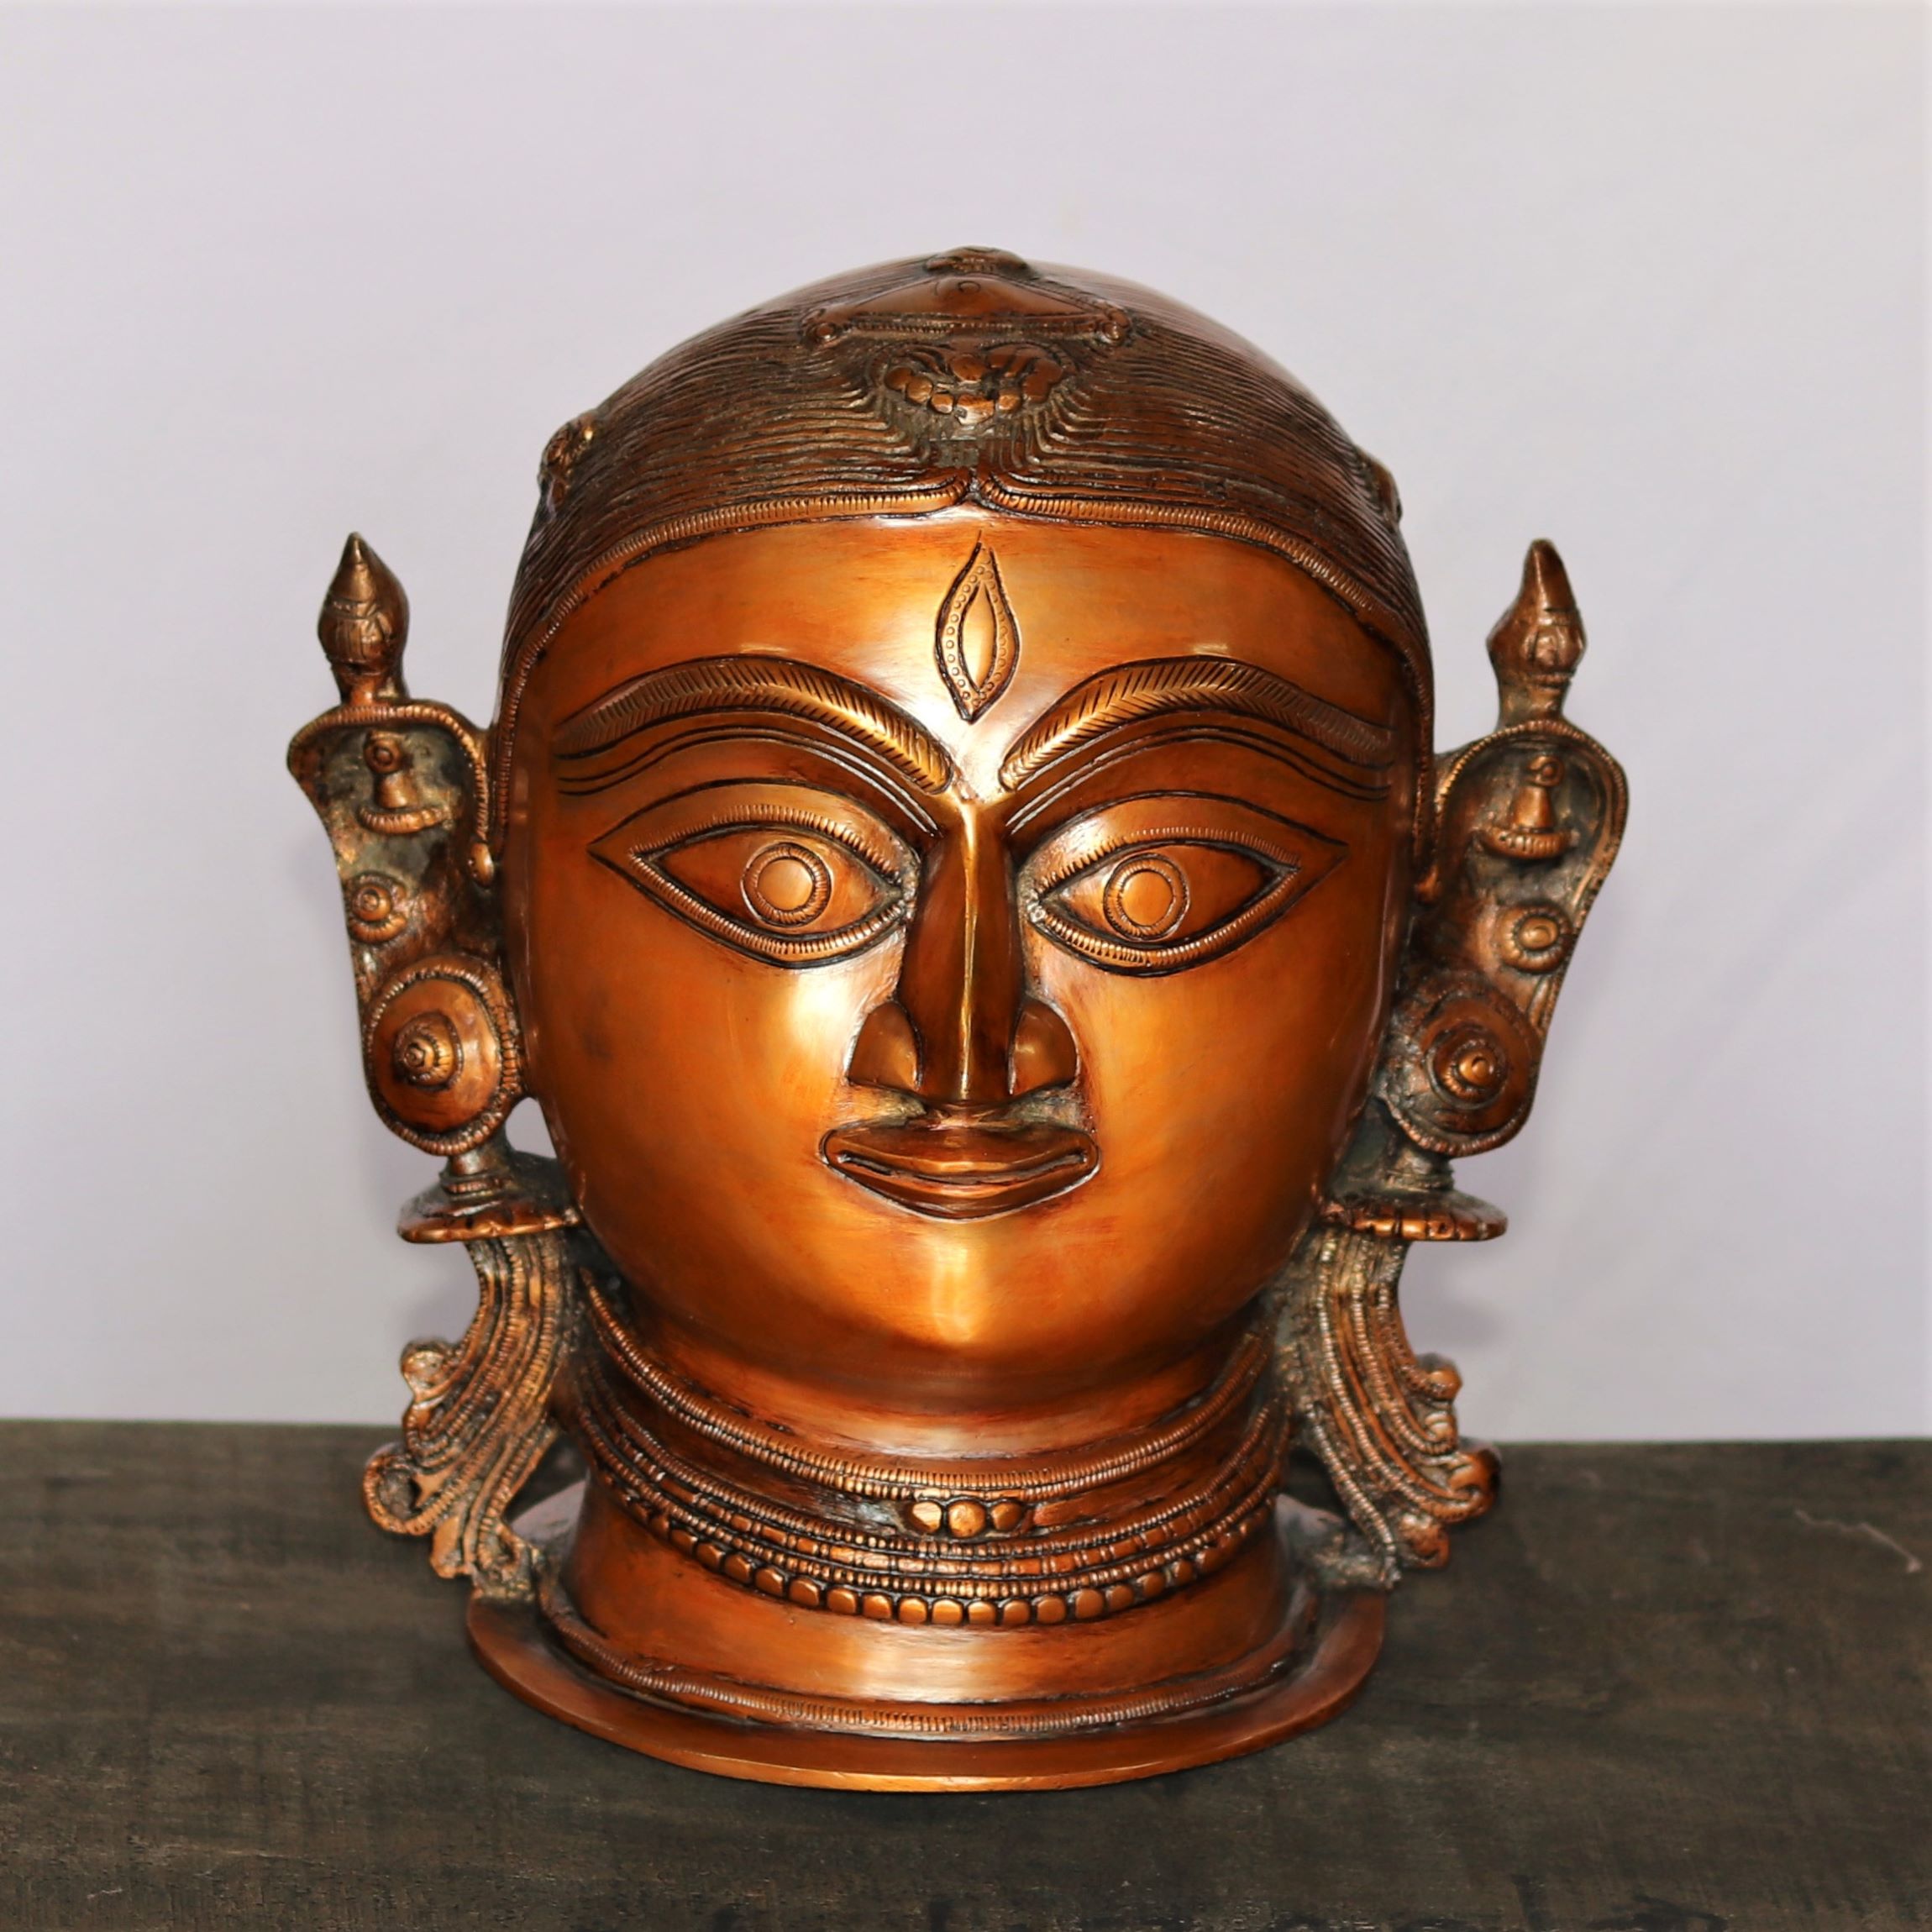 GAURI HEAD BRASS FIGURINE SHOWPIECE – 3 PIECES - Buy exclusive brass  statues, collectibles and decor